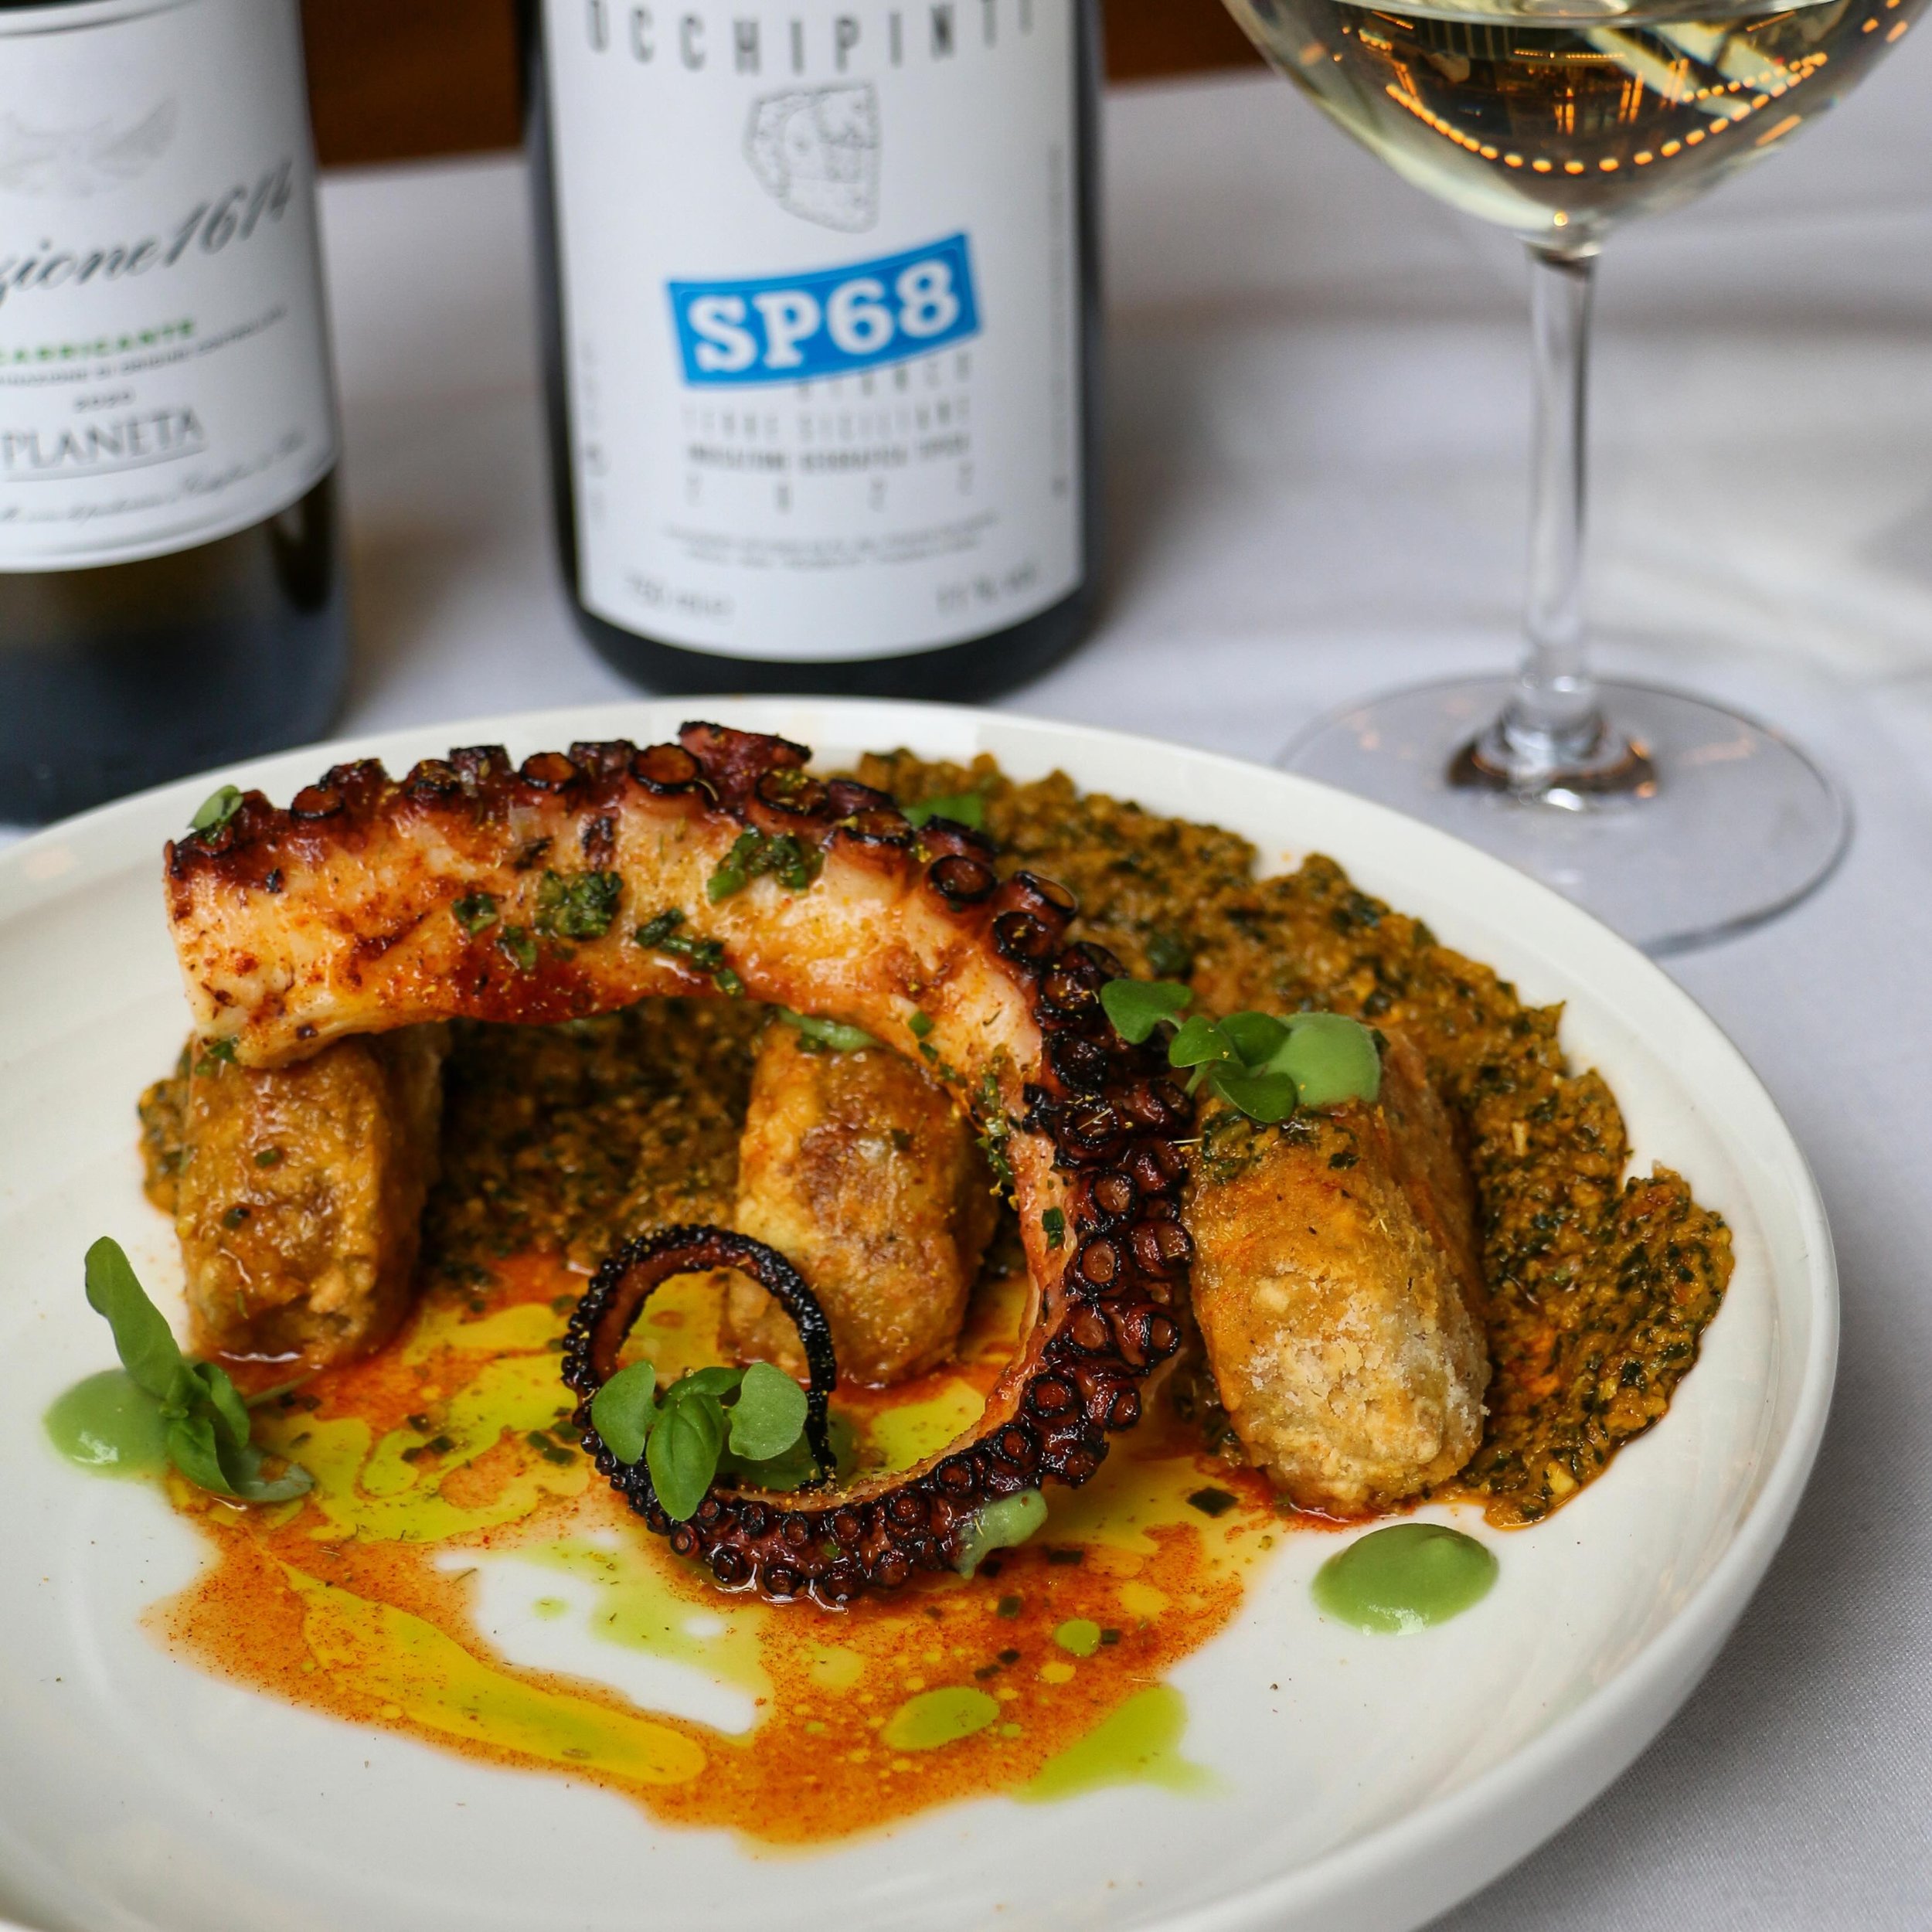 STARTING TONIGHT (through 4/17) 🍷🍋 Join us to celebrate the best female winemakers of Sicily with a limited-run tasting menu 🍋🍷

[First Course] Spicy Grilled Octopus: pesto alla trapanese, almonds, chickpea fritters, castelvetrano olives, basil

